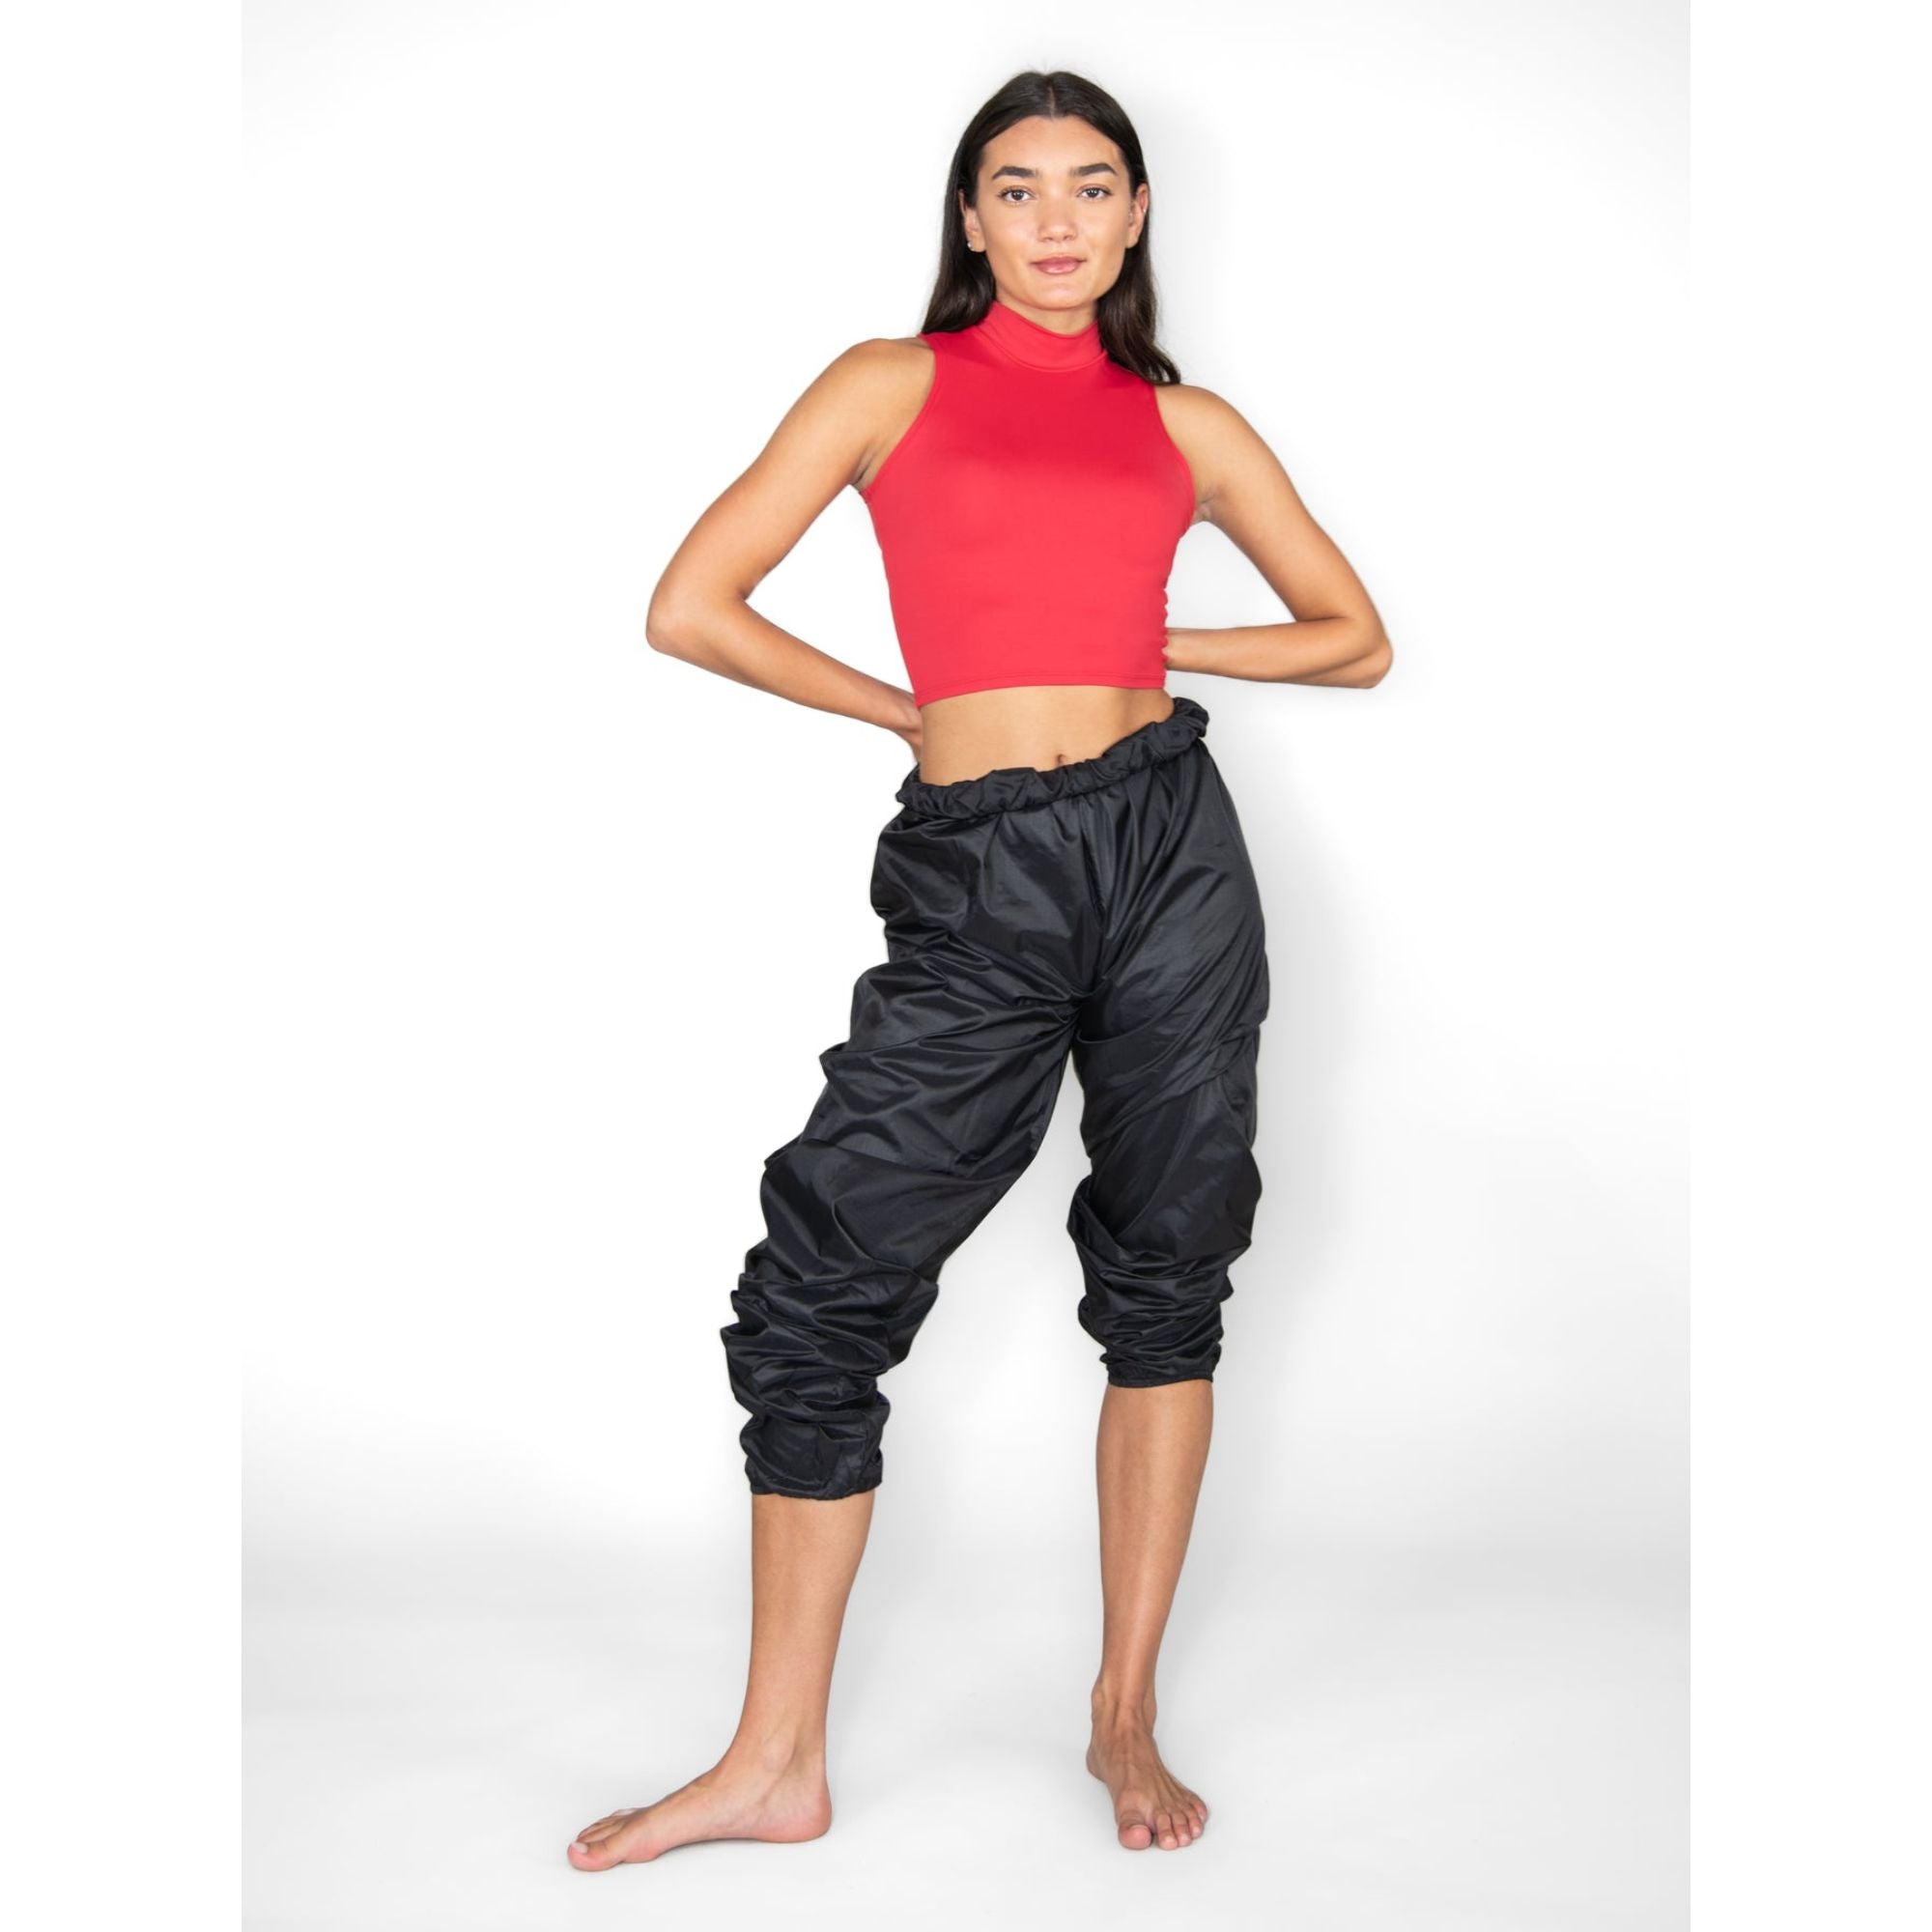 Body Wrappers 701 Unisex Ripstop Pants Black